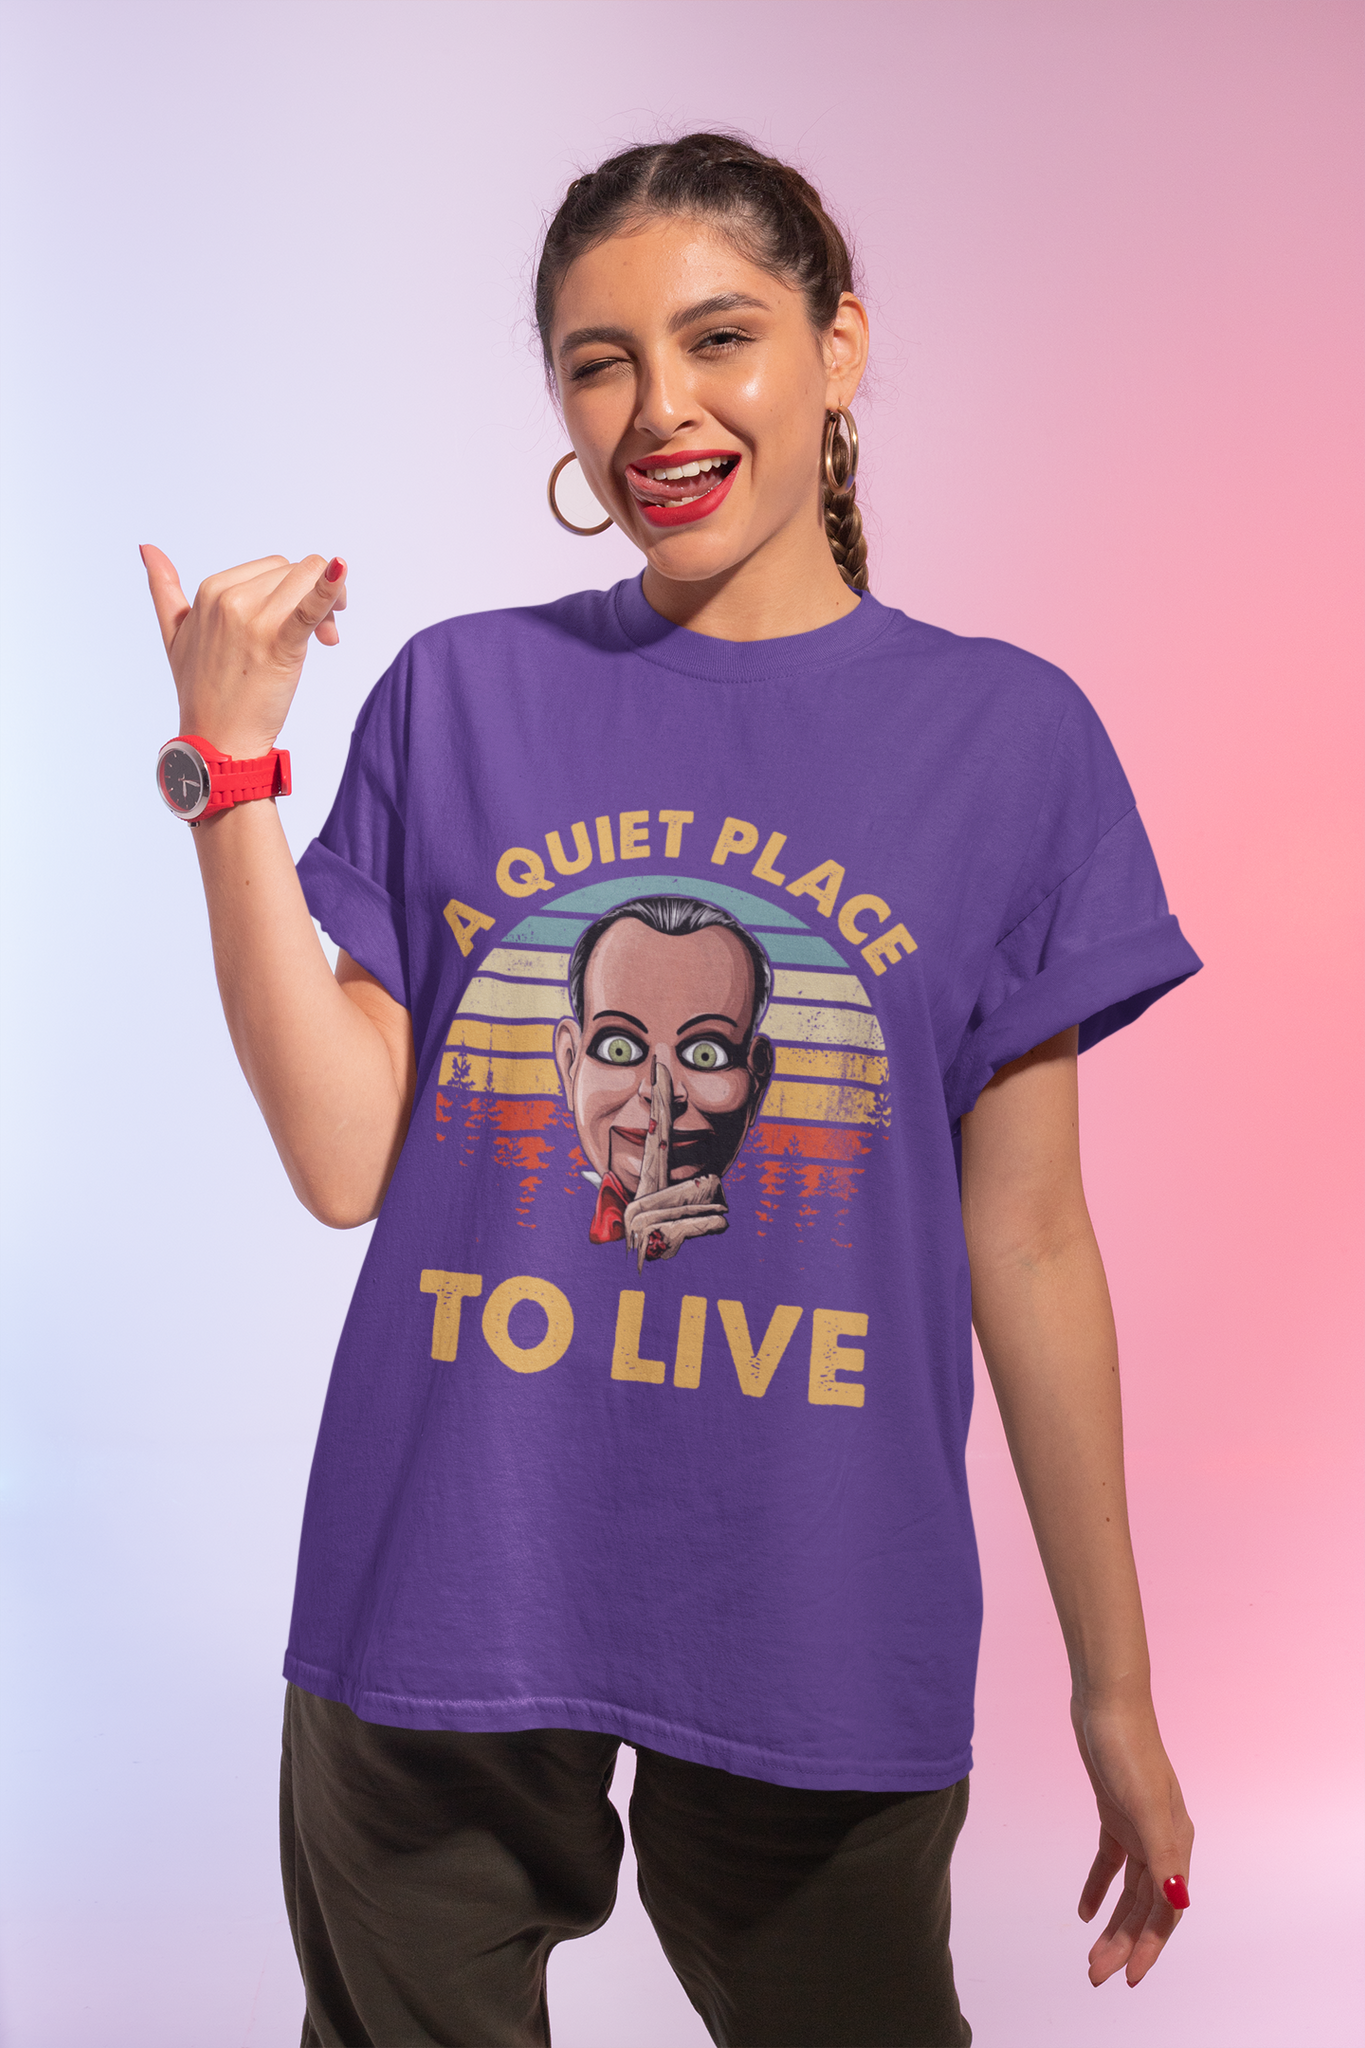 Dead Silence Vintage T Shirt, Billy Puppet T Shirt, A Quiet Place To Live Tshirt, Halloween Gifts